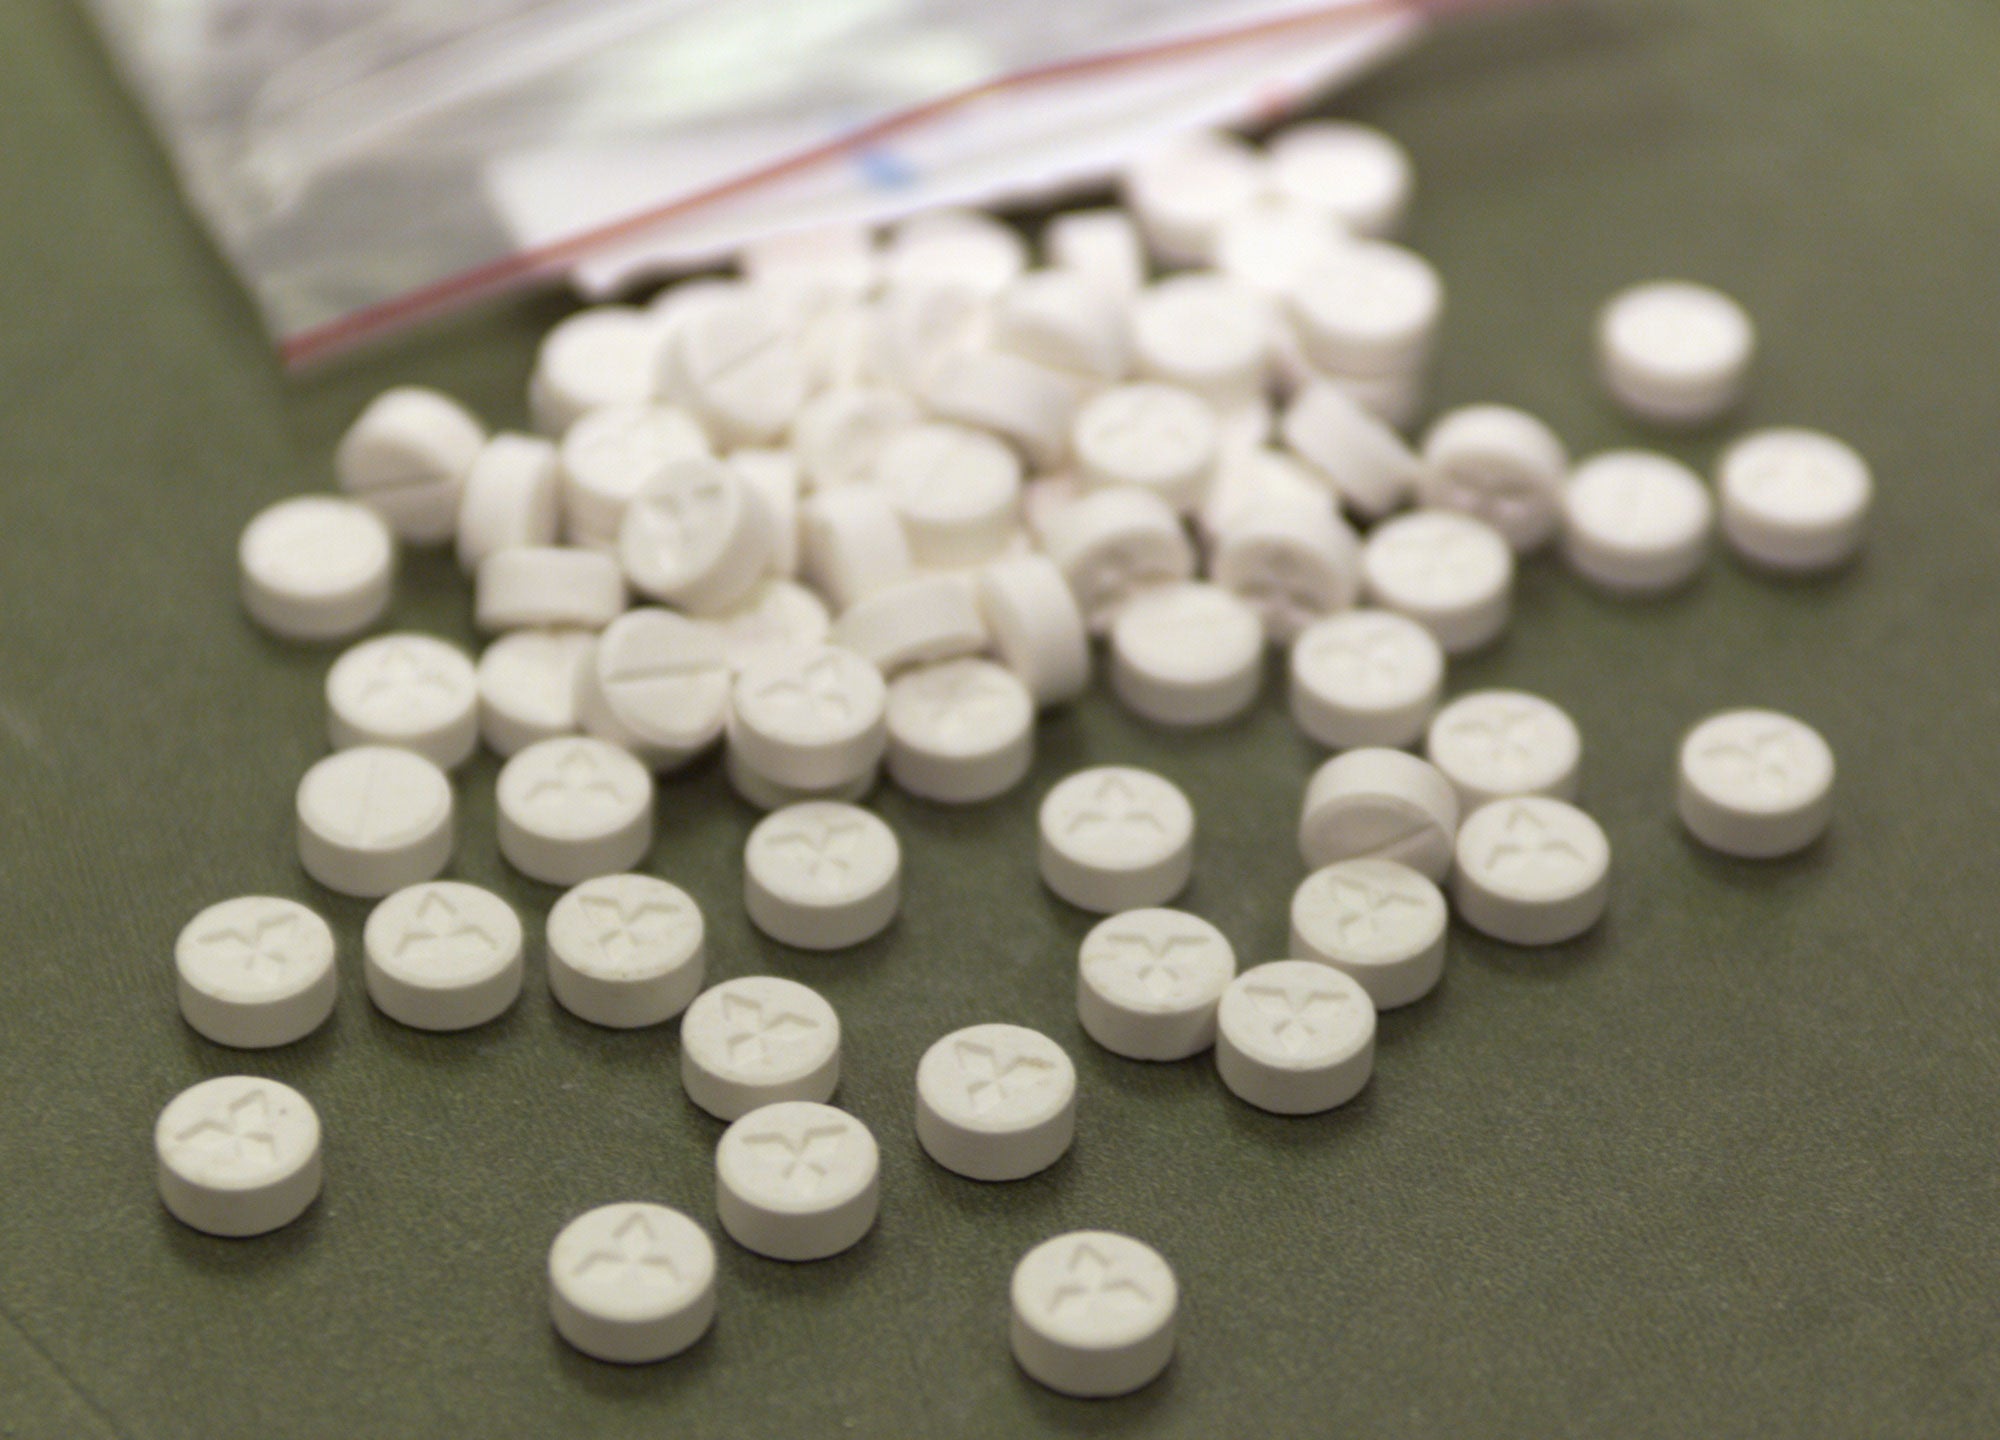 MDMA is commonly used as a party drug - but could it help those with PTSD?